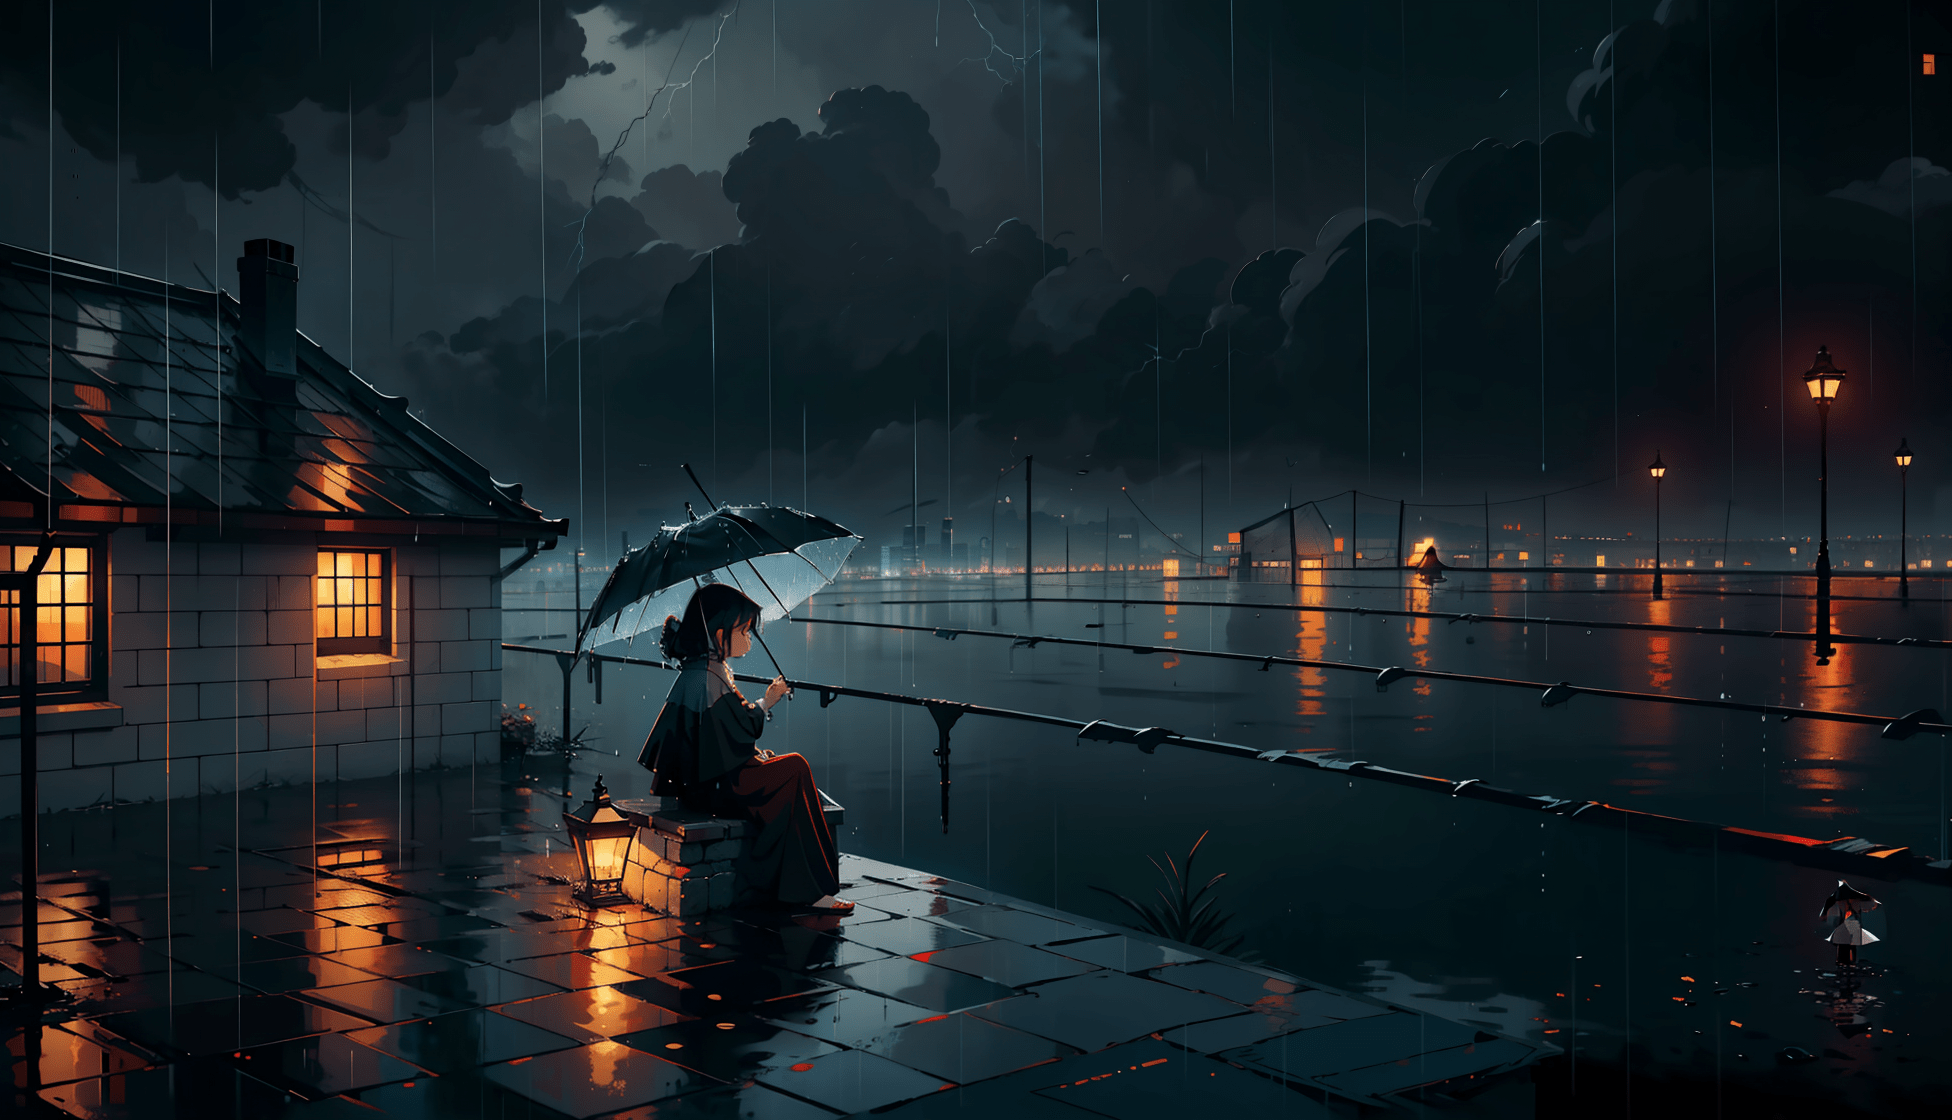 A woman with an umbrella sits on a roof in the rain. - Rain